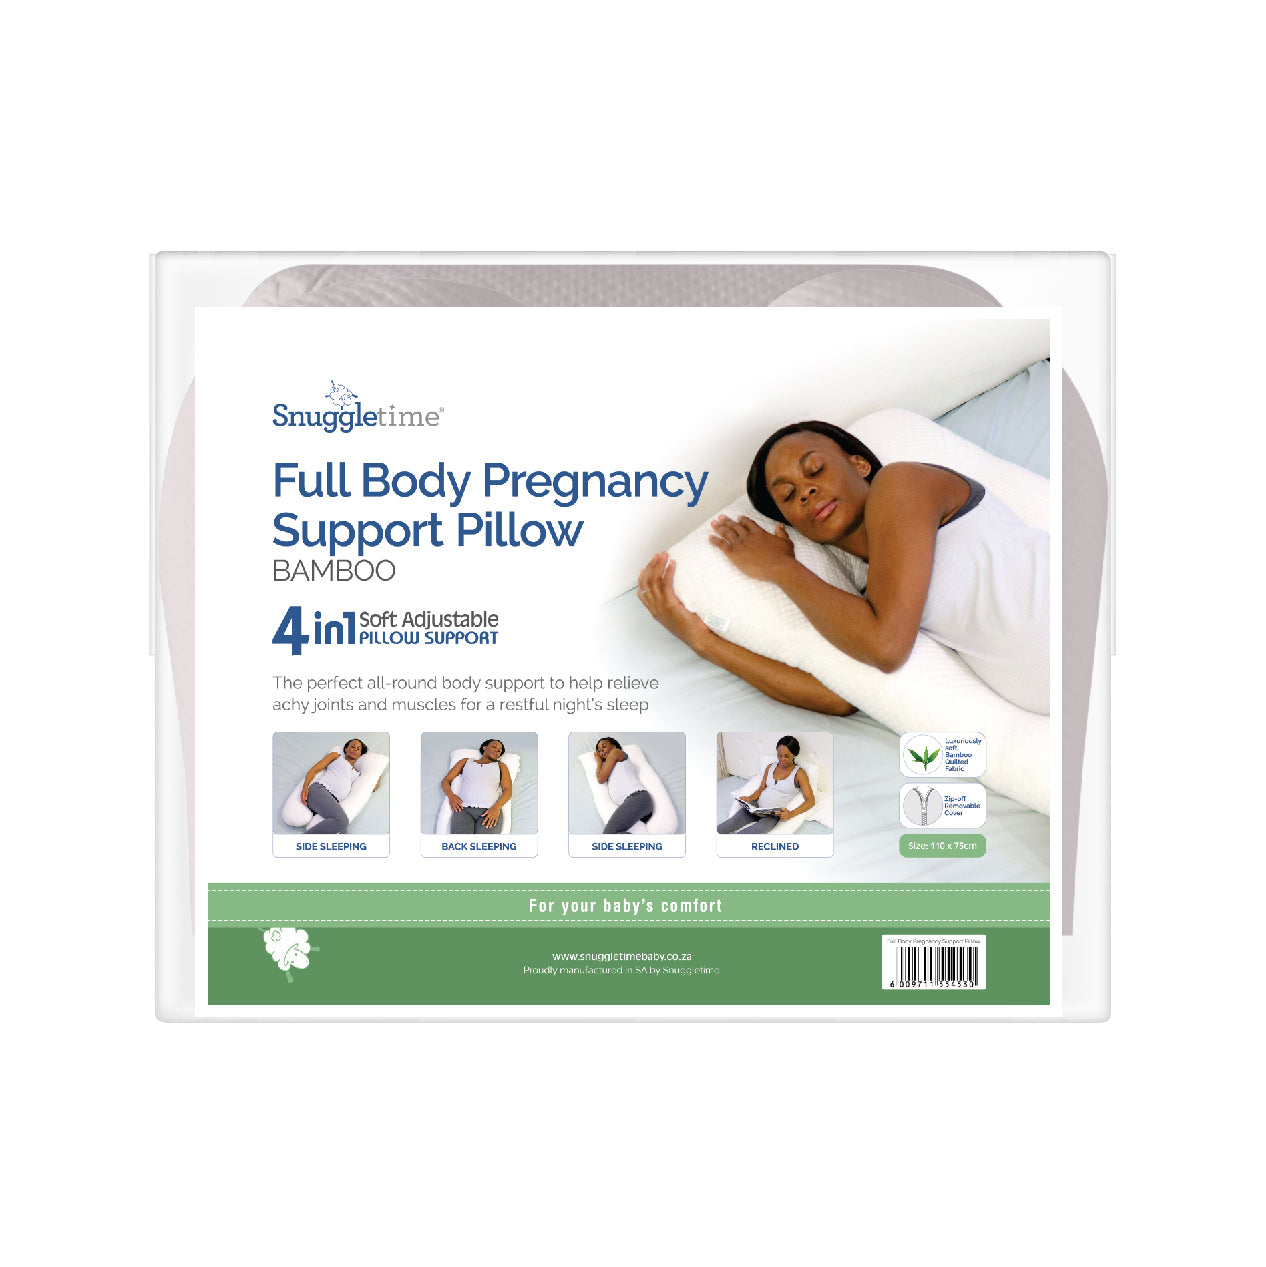 Snuggletime Full Body Pregnancy Support Pillow - Bamboo